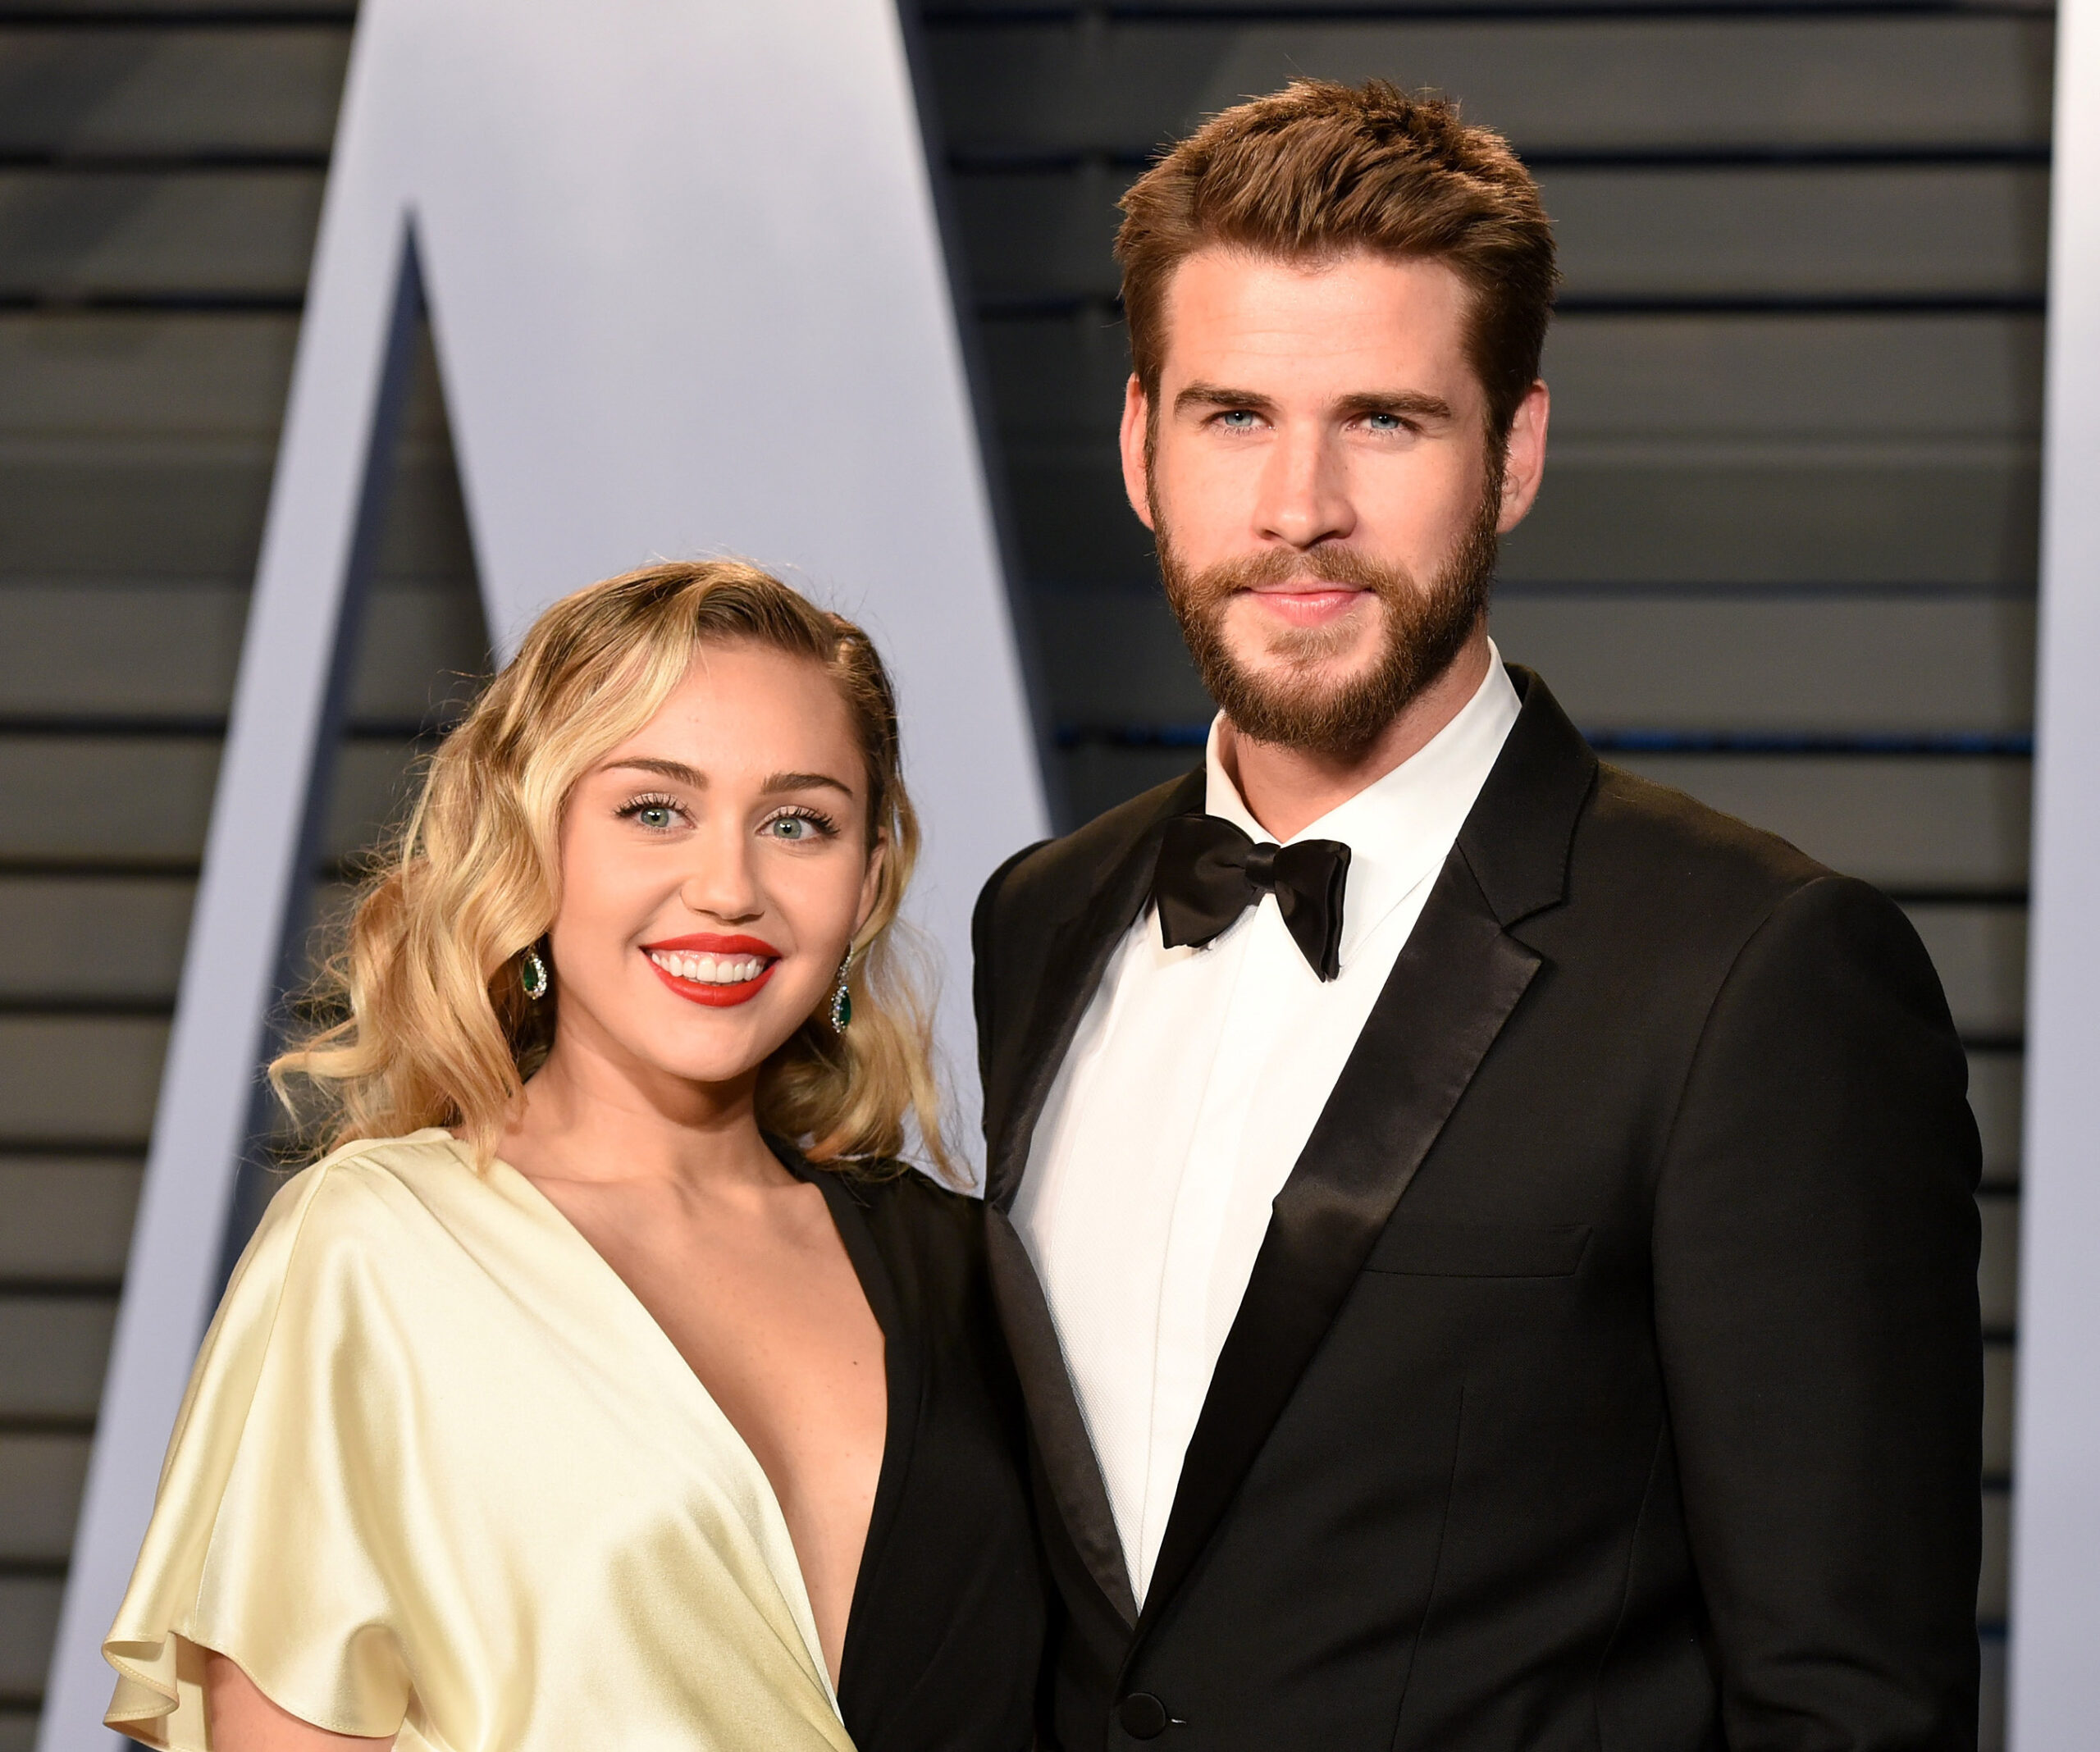 EXCLUSIVE: Miley Cyrus and Liam Hemsworth are expecting!